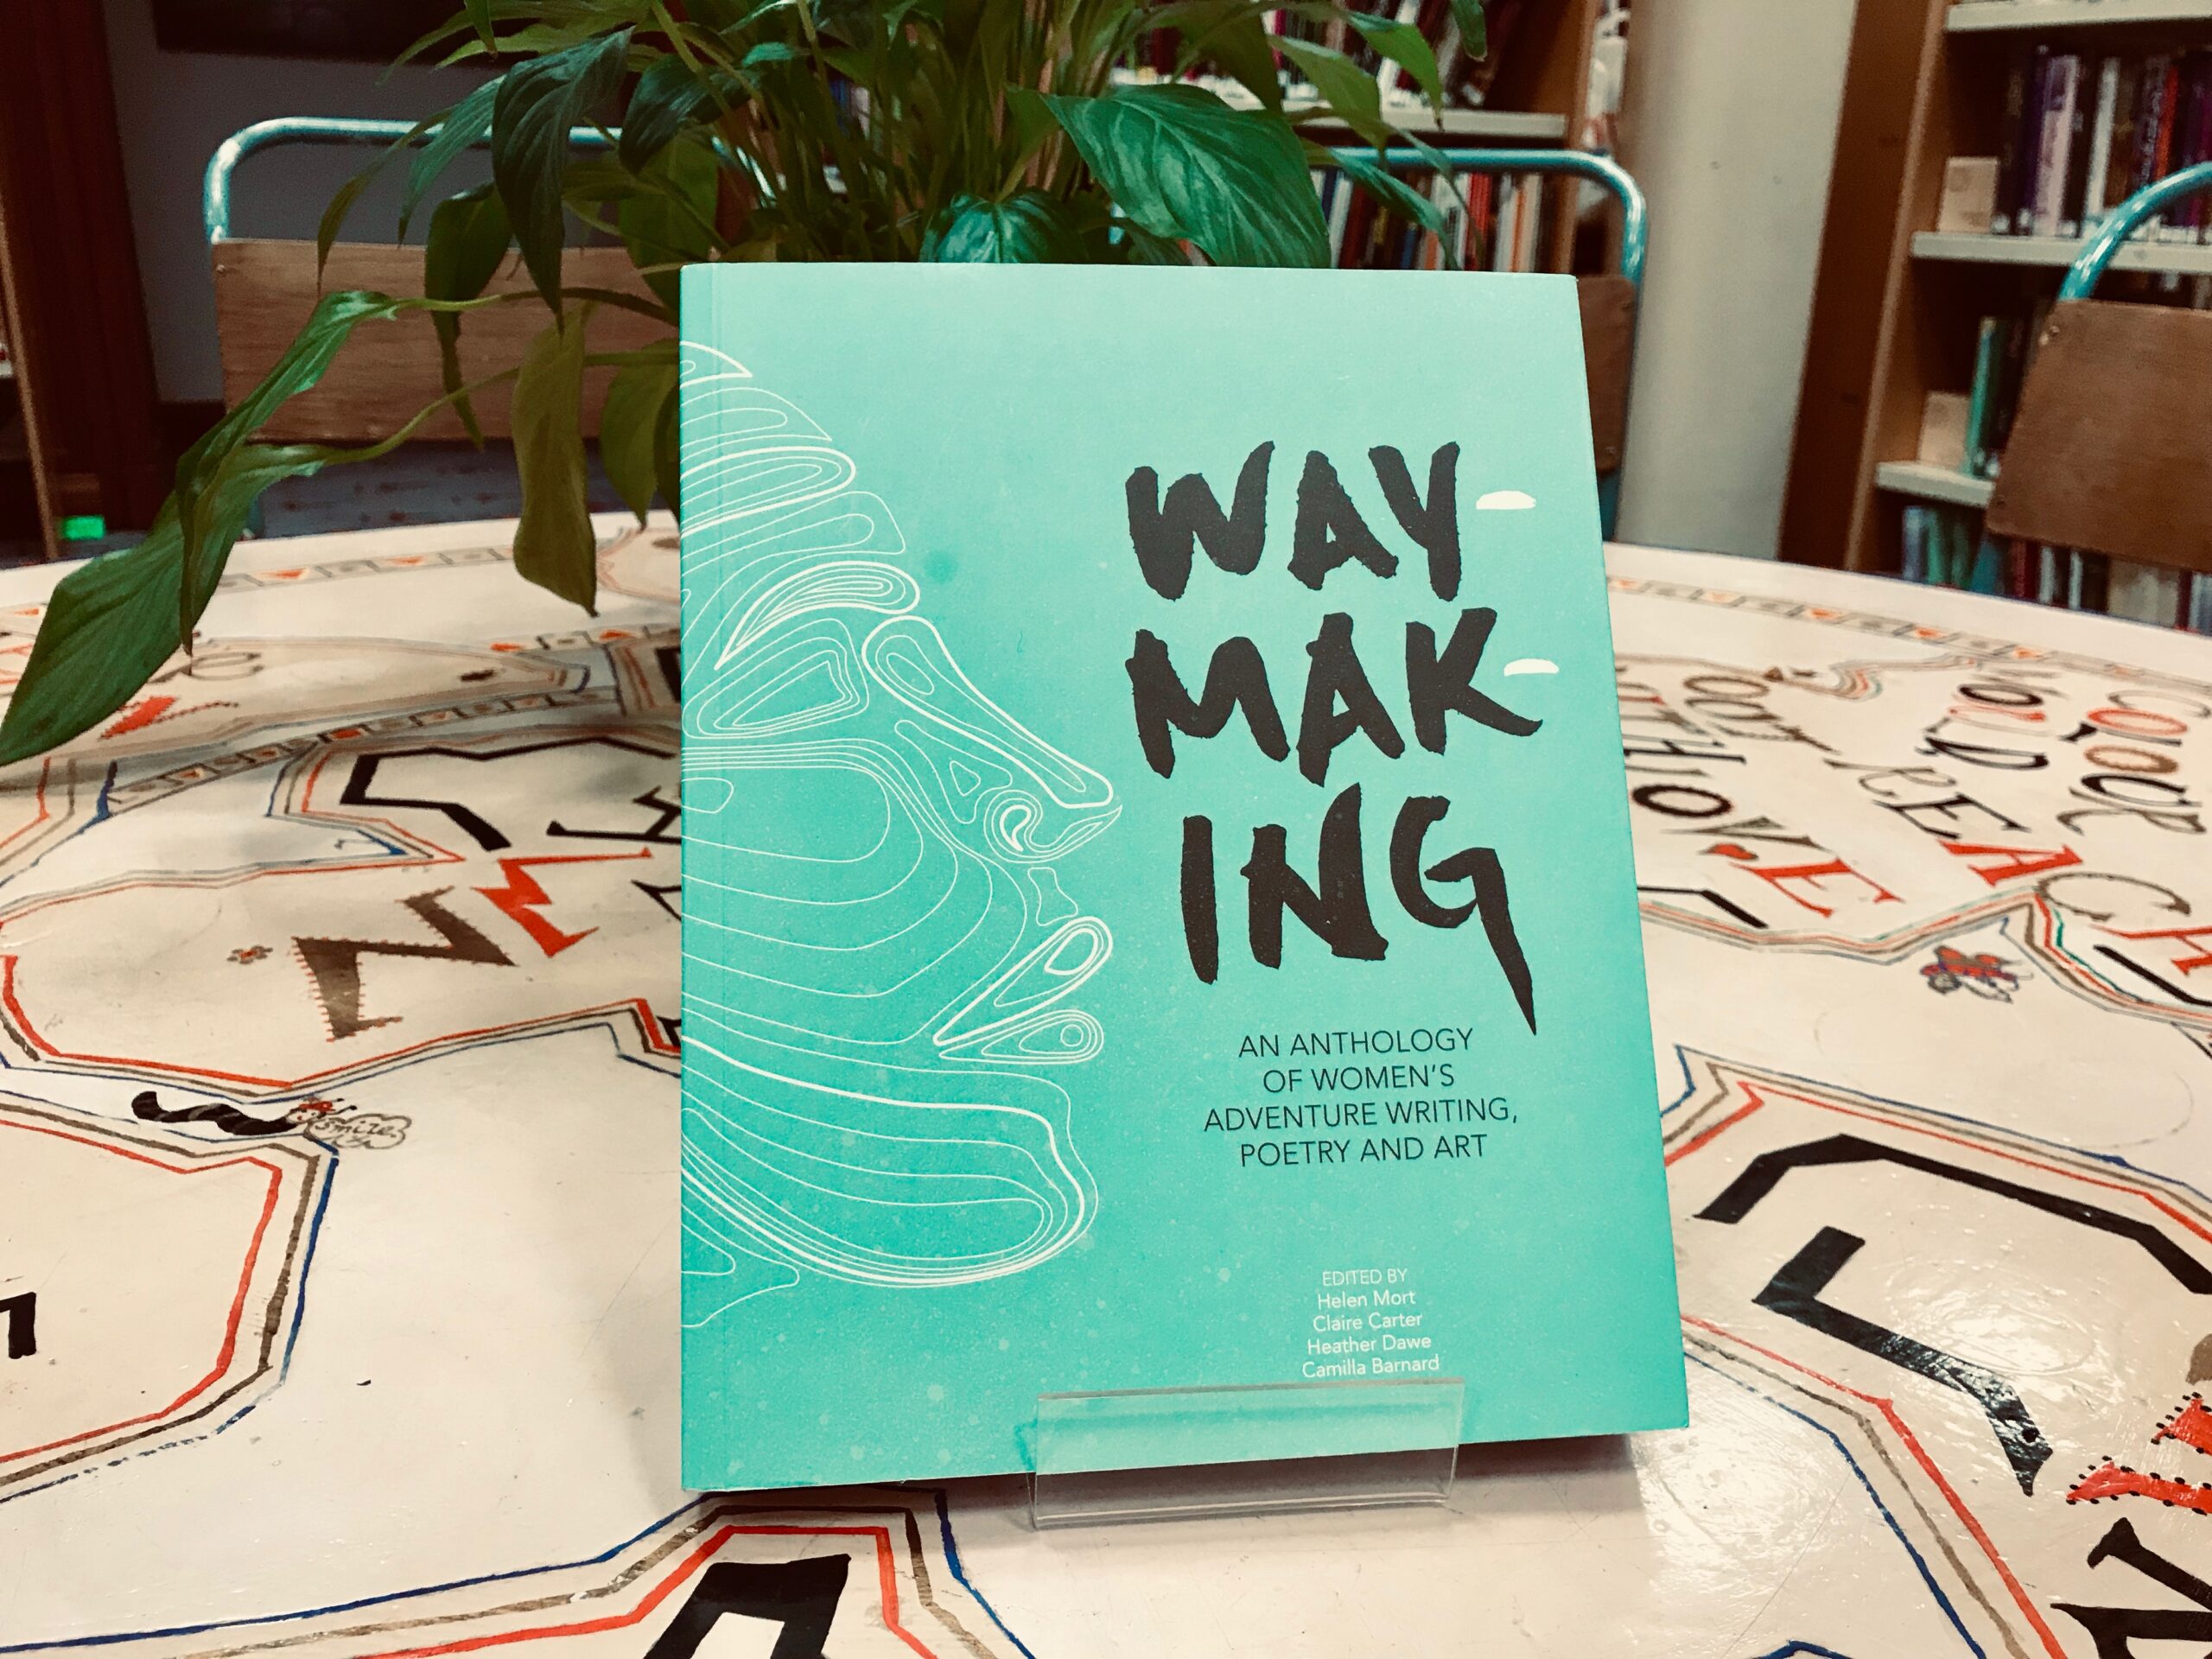 Waymaking: An Anthology of Women's Adventure Writing, Poetry and Art